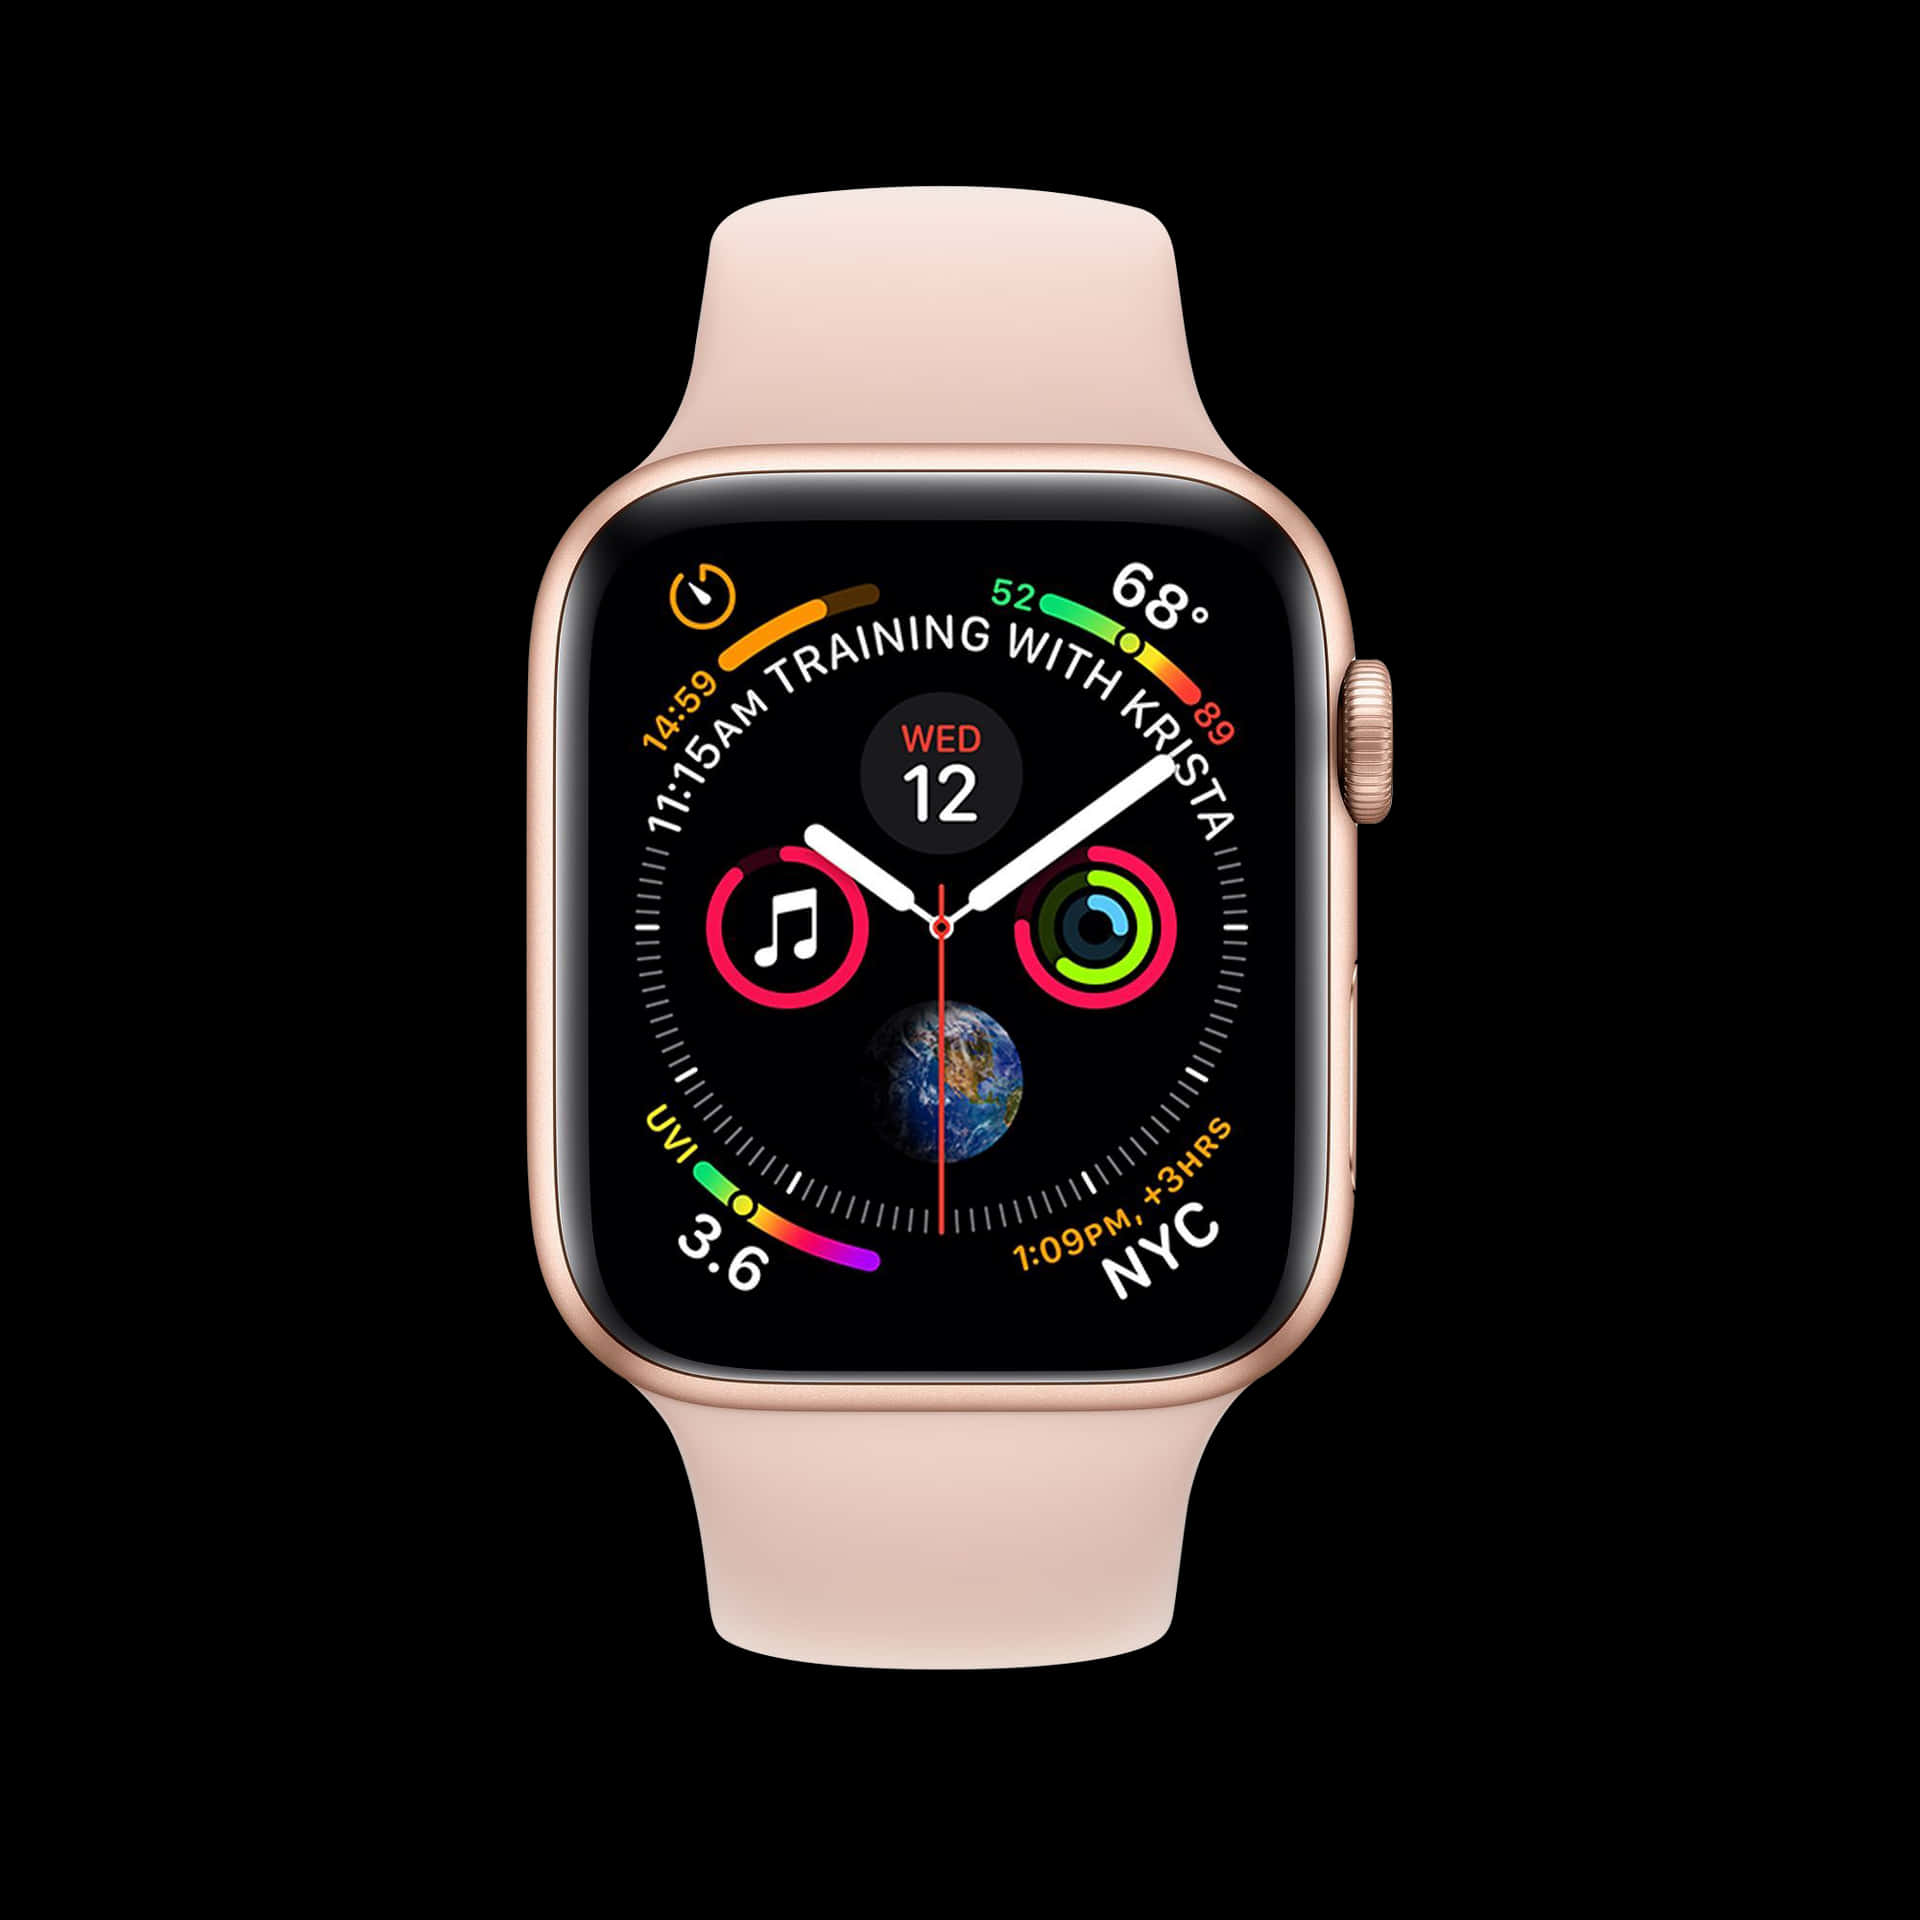 Get ready to take your iPhone experience to the next level with the Apple Watch.